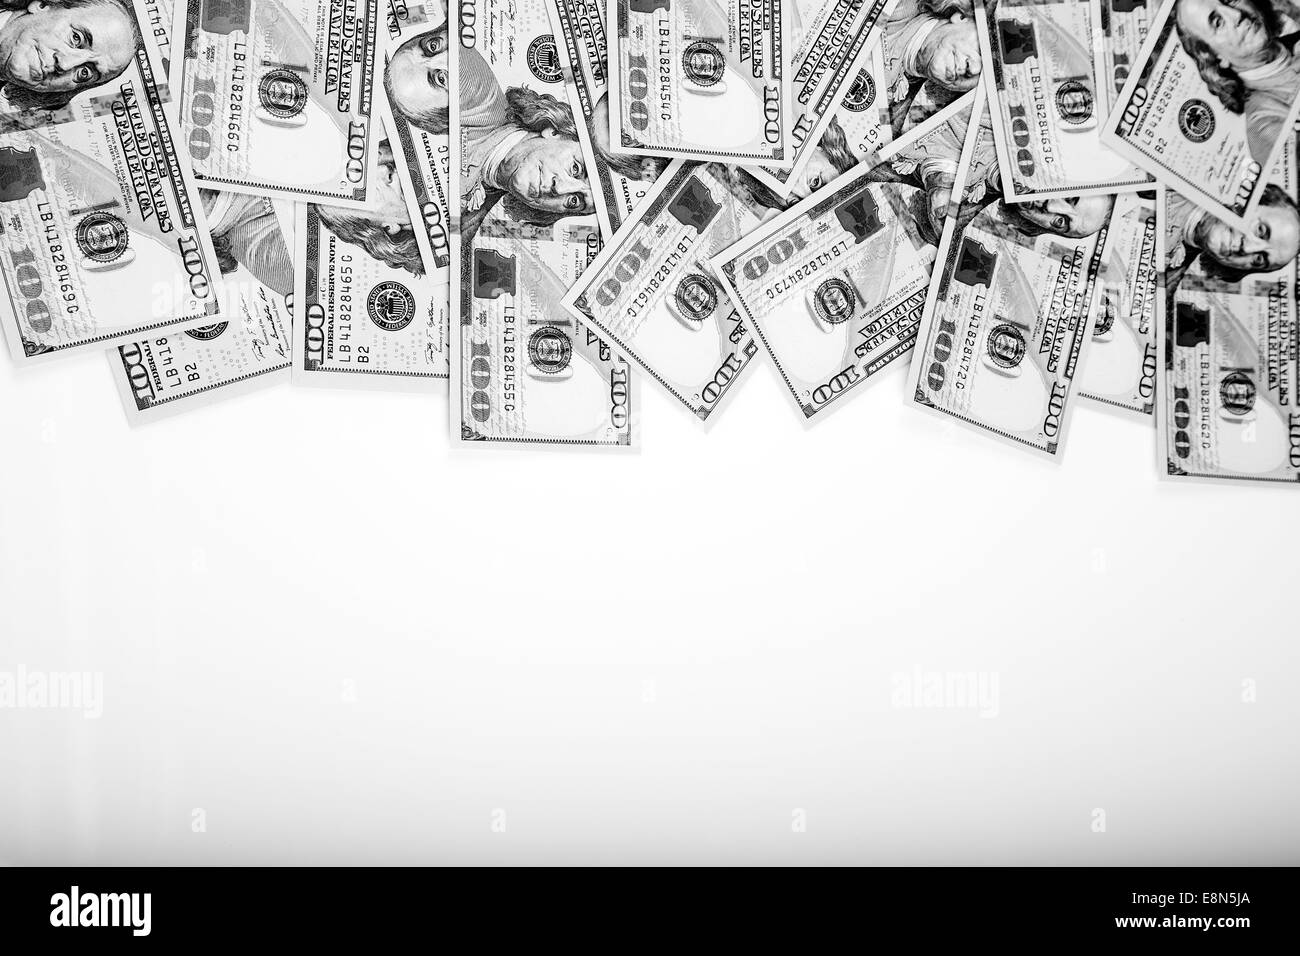 Dollars Photography: Frame of 100 dollars banknotes Stock Photo